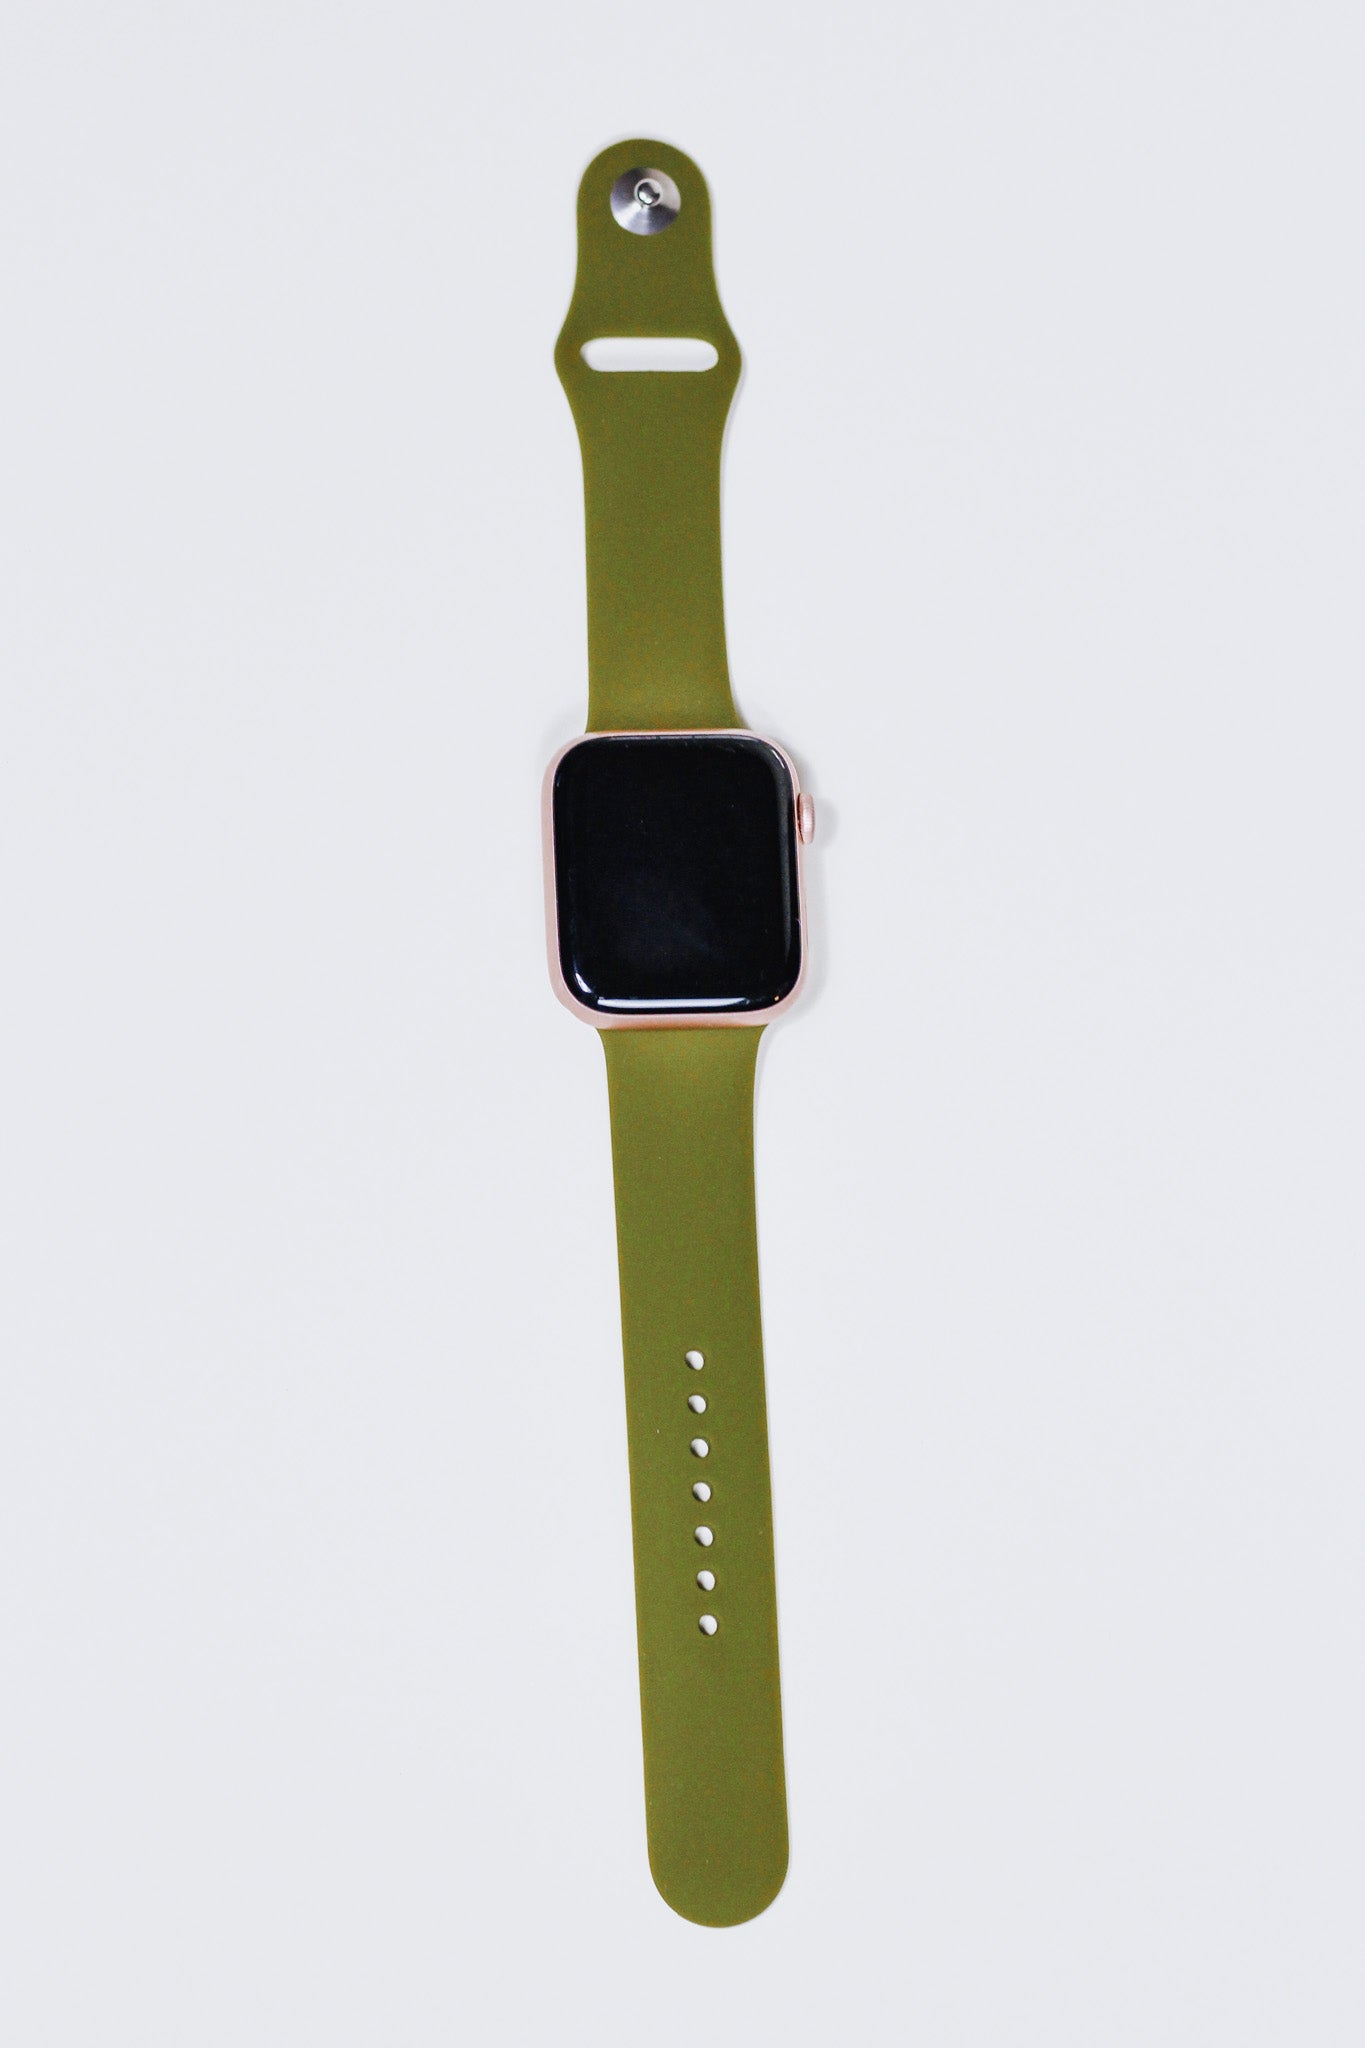 For Next Time Dark Green Apple Watch Band